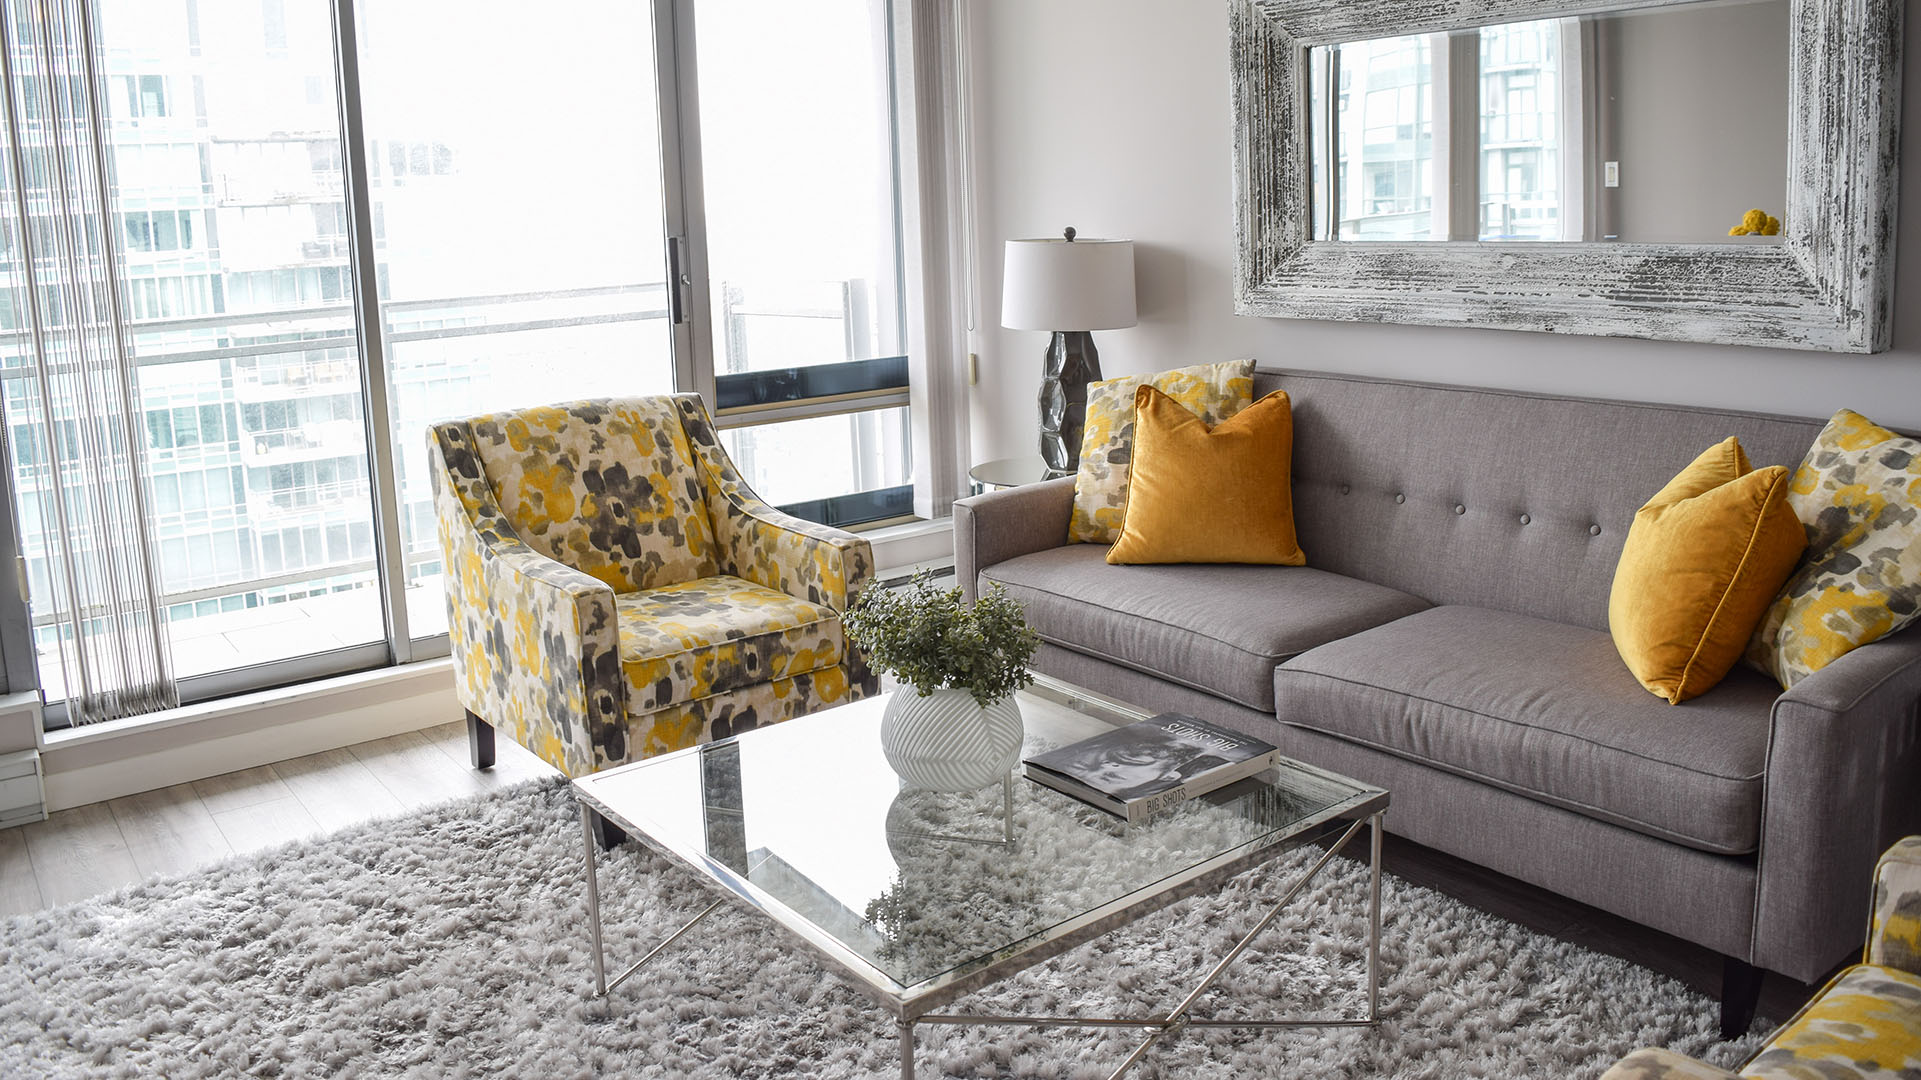 Grey sofa, pattern accent chair, and a glass coffee table in the living room of apartment 3203-1288 West Georgia, at the Residences on Georgia.